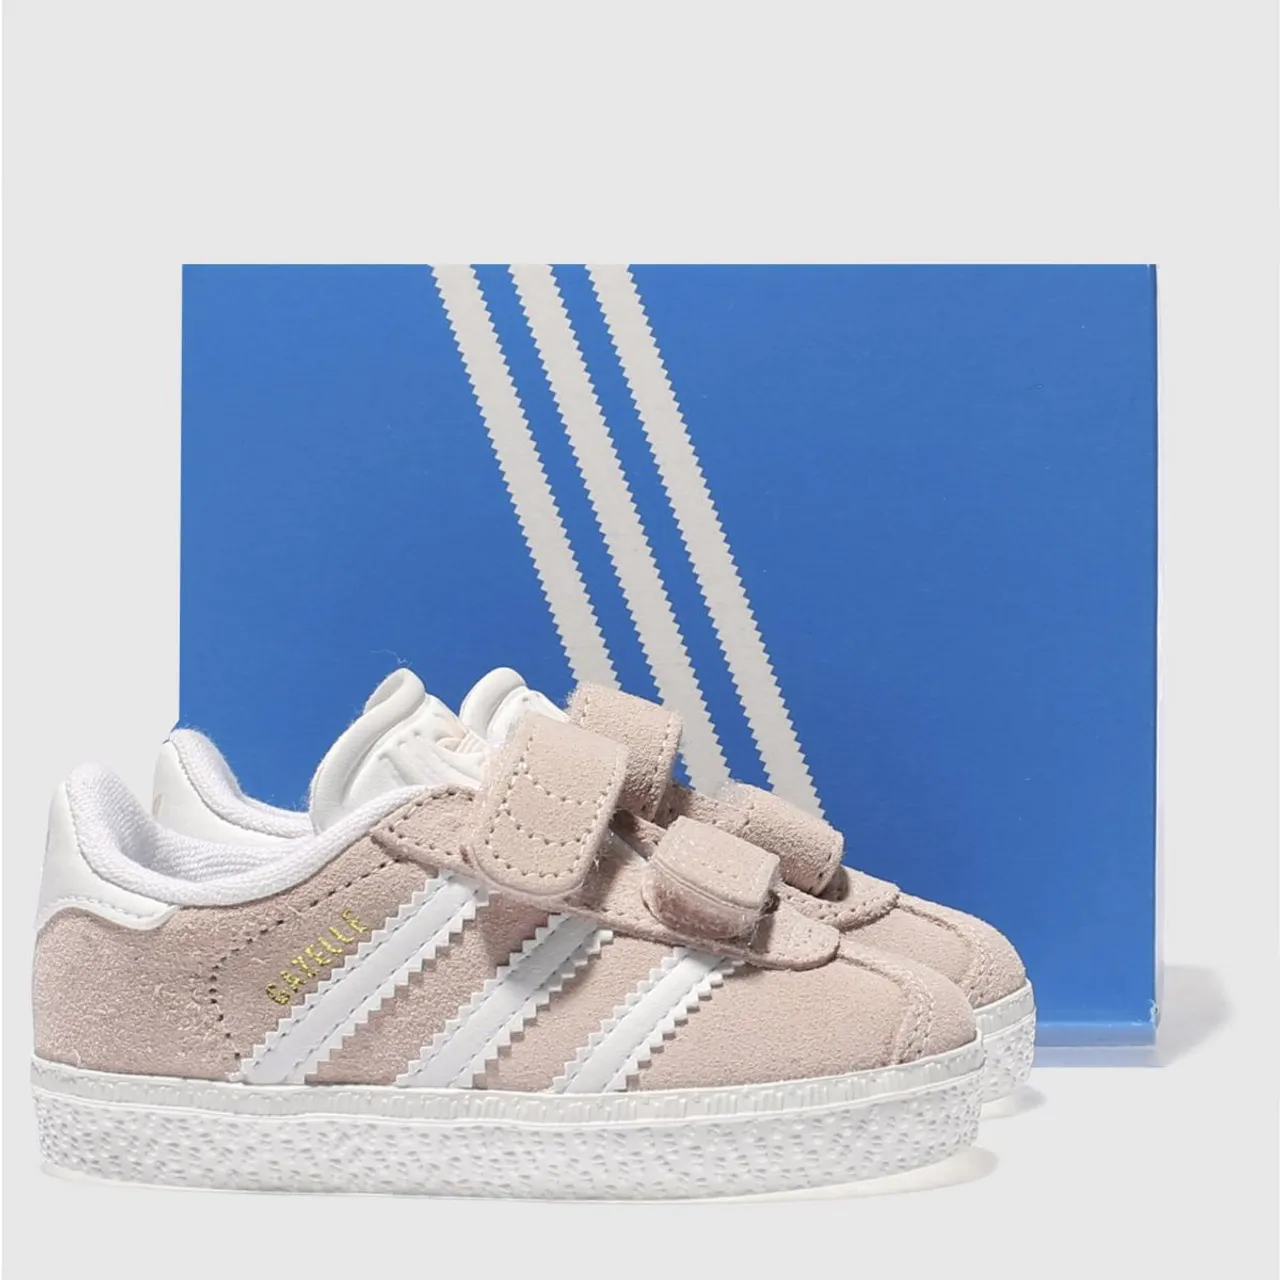 Adidas Pale Pink Gazelle Girls Toddler Trainers